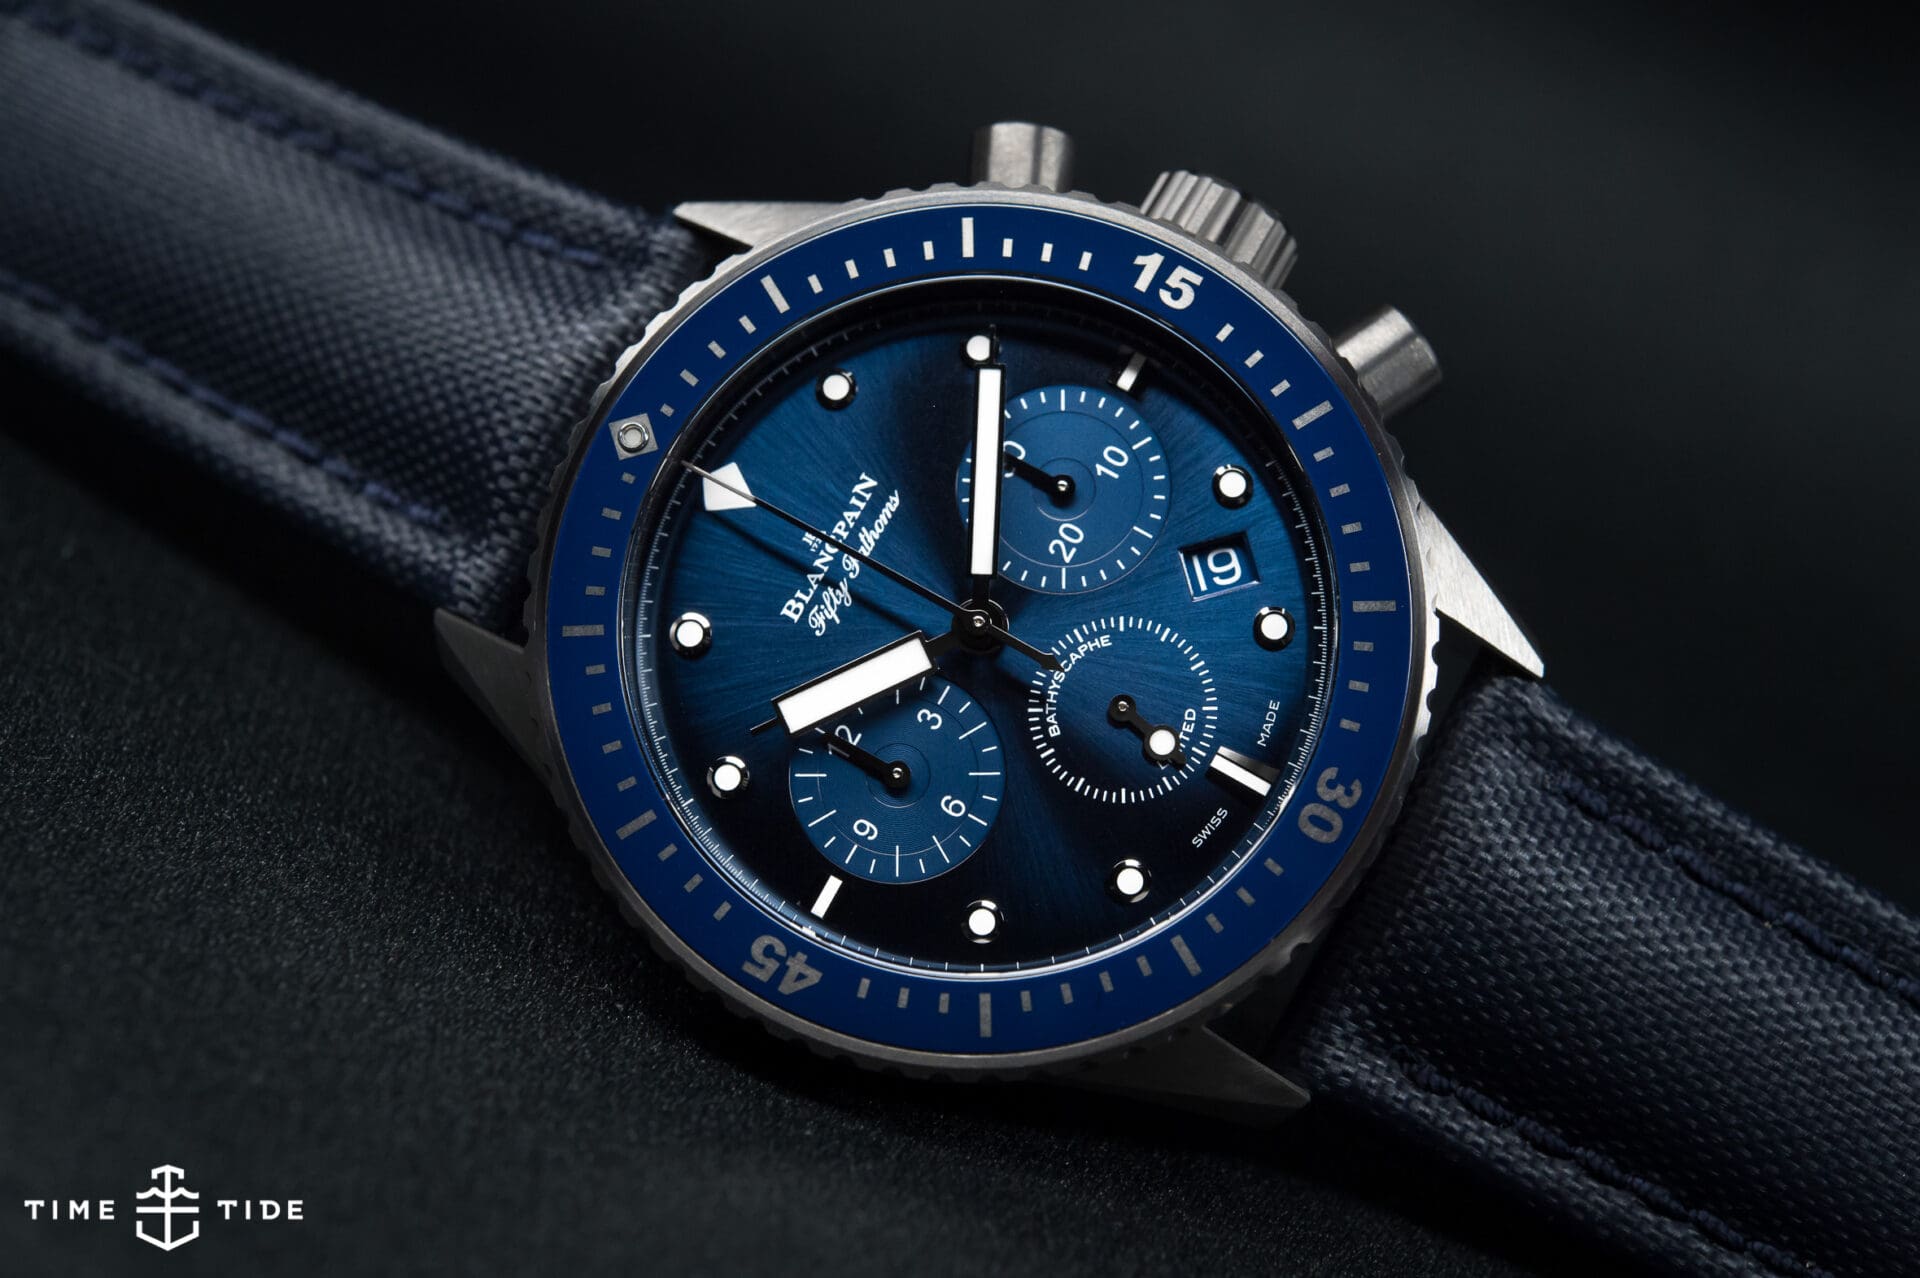 HOLIDAY BUYING GUIDE: The Blancpain Ocean Commitment Bathyscaphe Flyback Chronograph